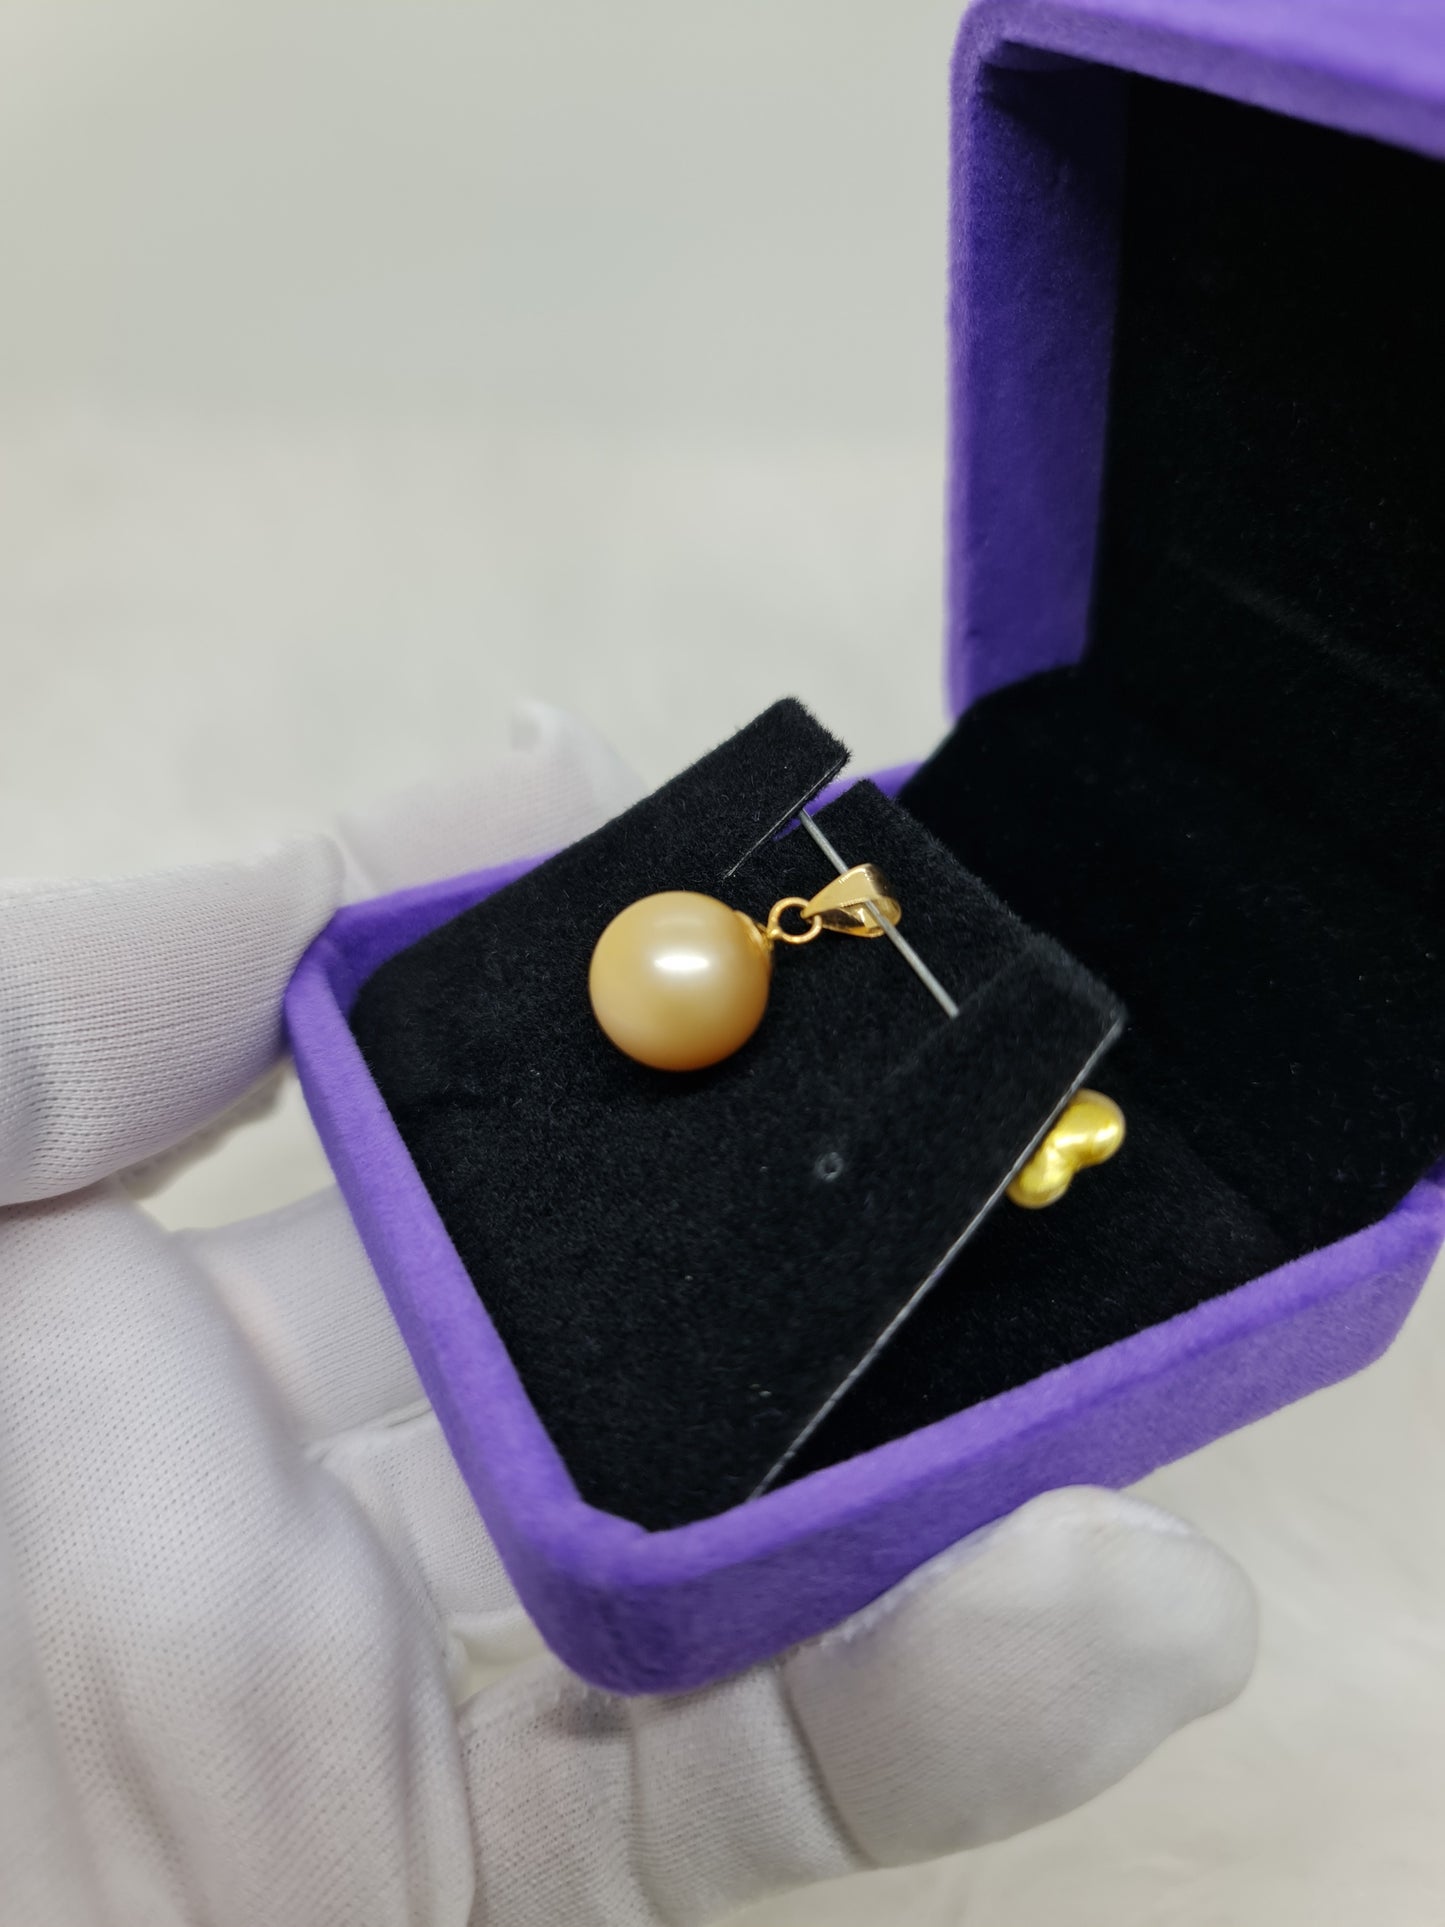 12.5mm Champagne South Sea Pearls Pendant mount in 14Karat Gold